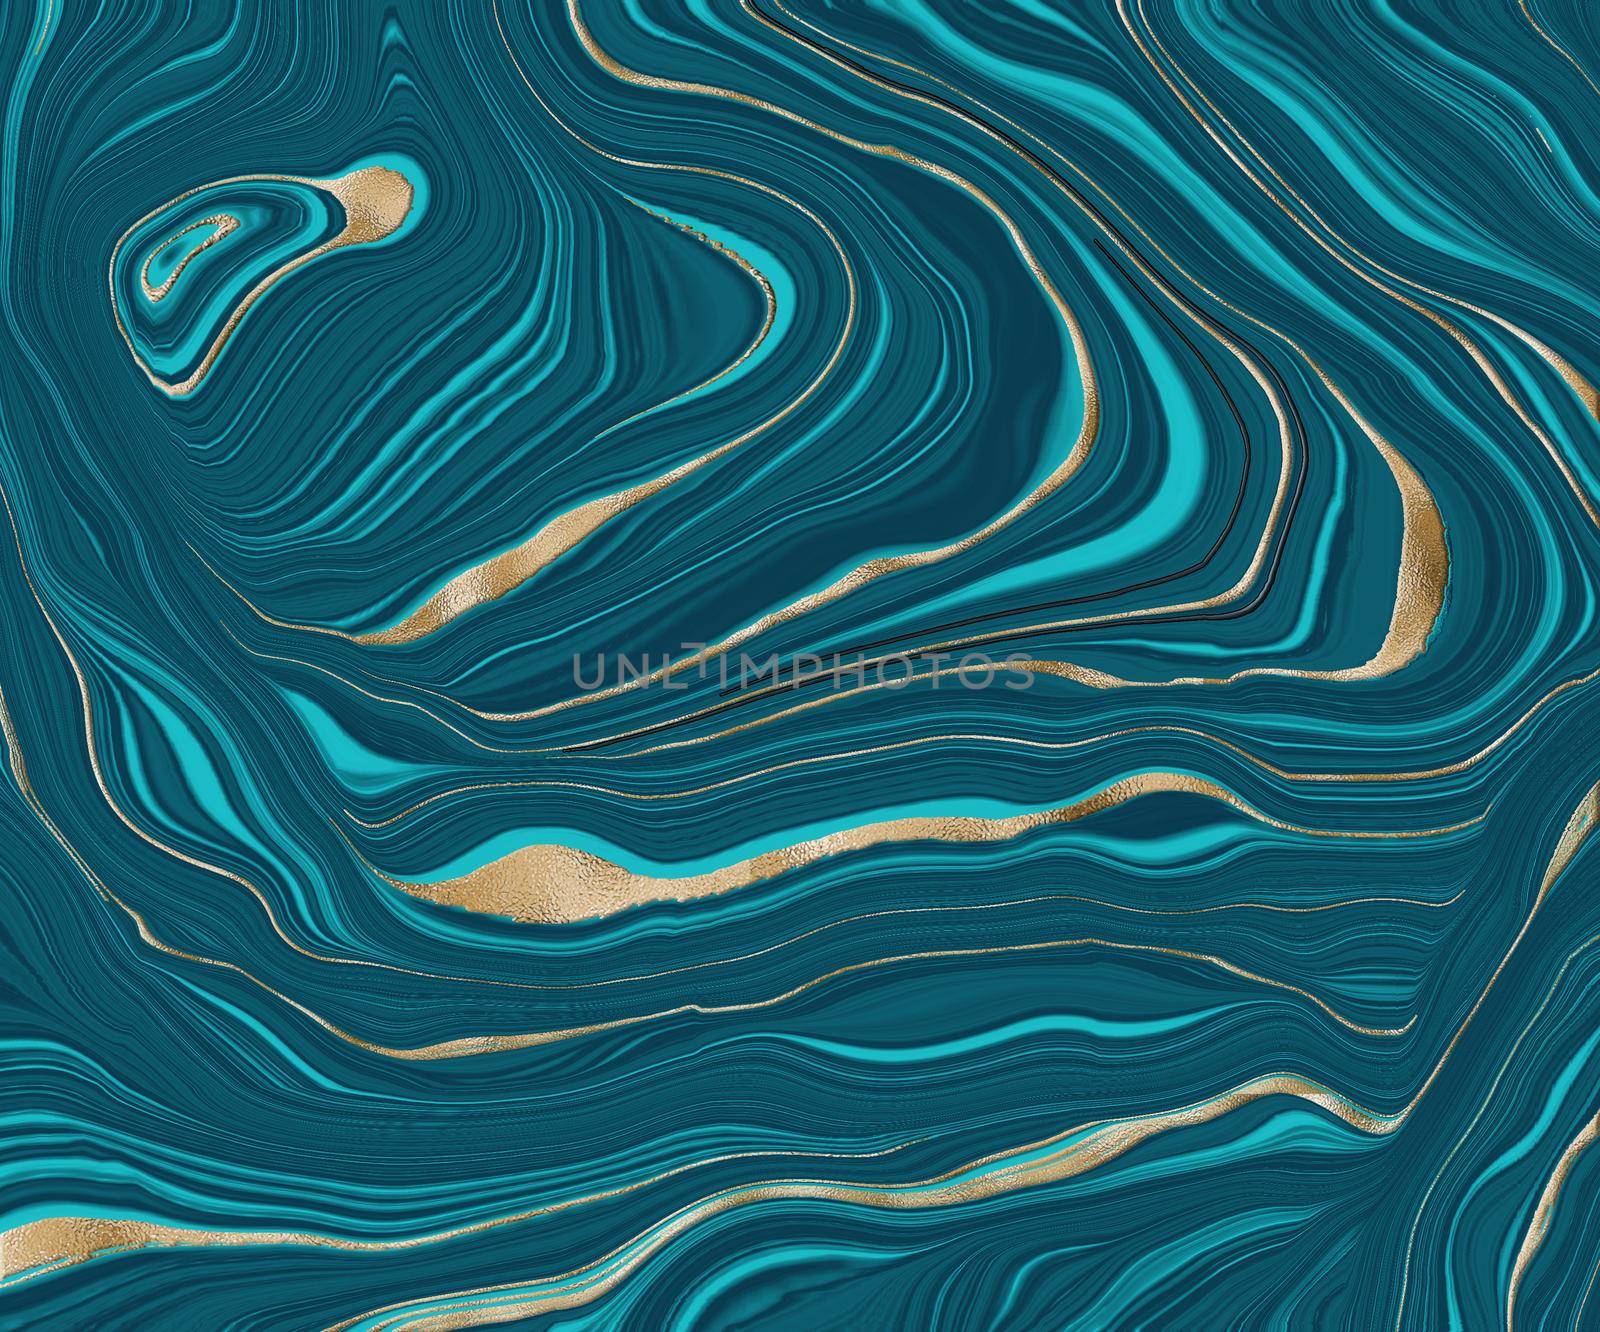 Agate stone texture with gold. Blue green turquoise Fluid marbling effect with gold vein. Abstract Agate Background. Illustration